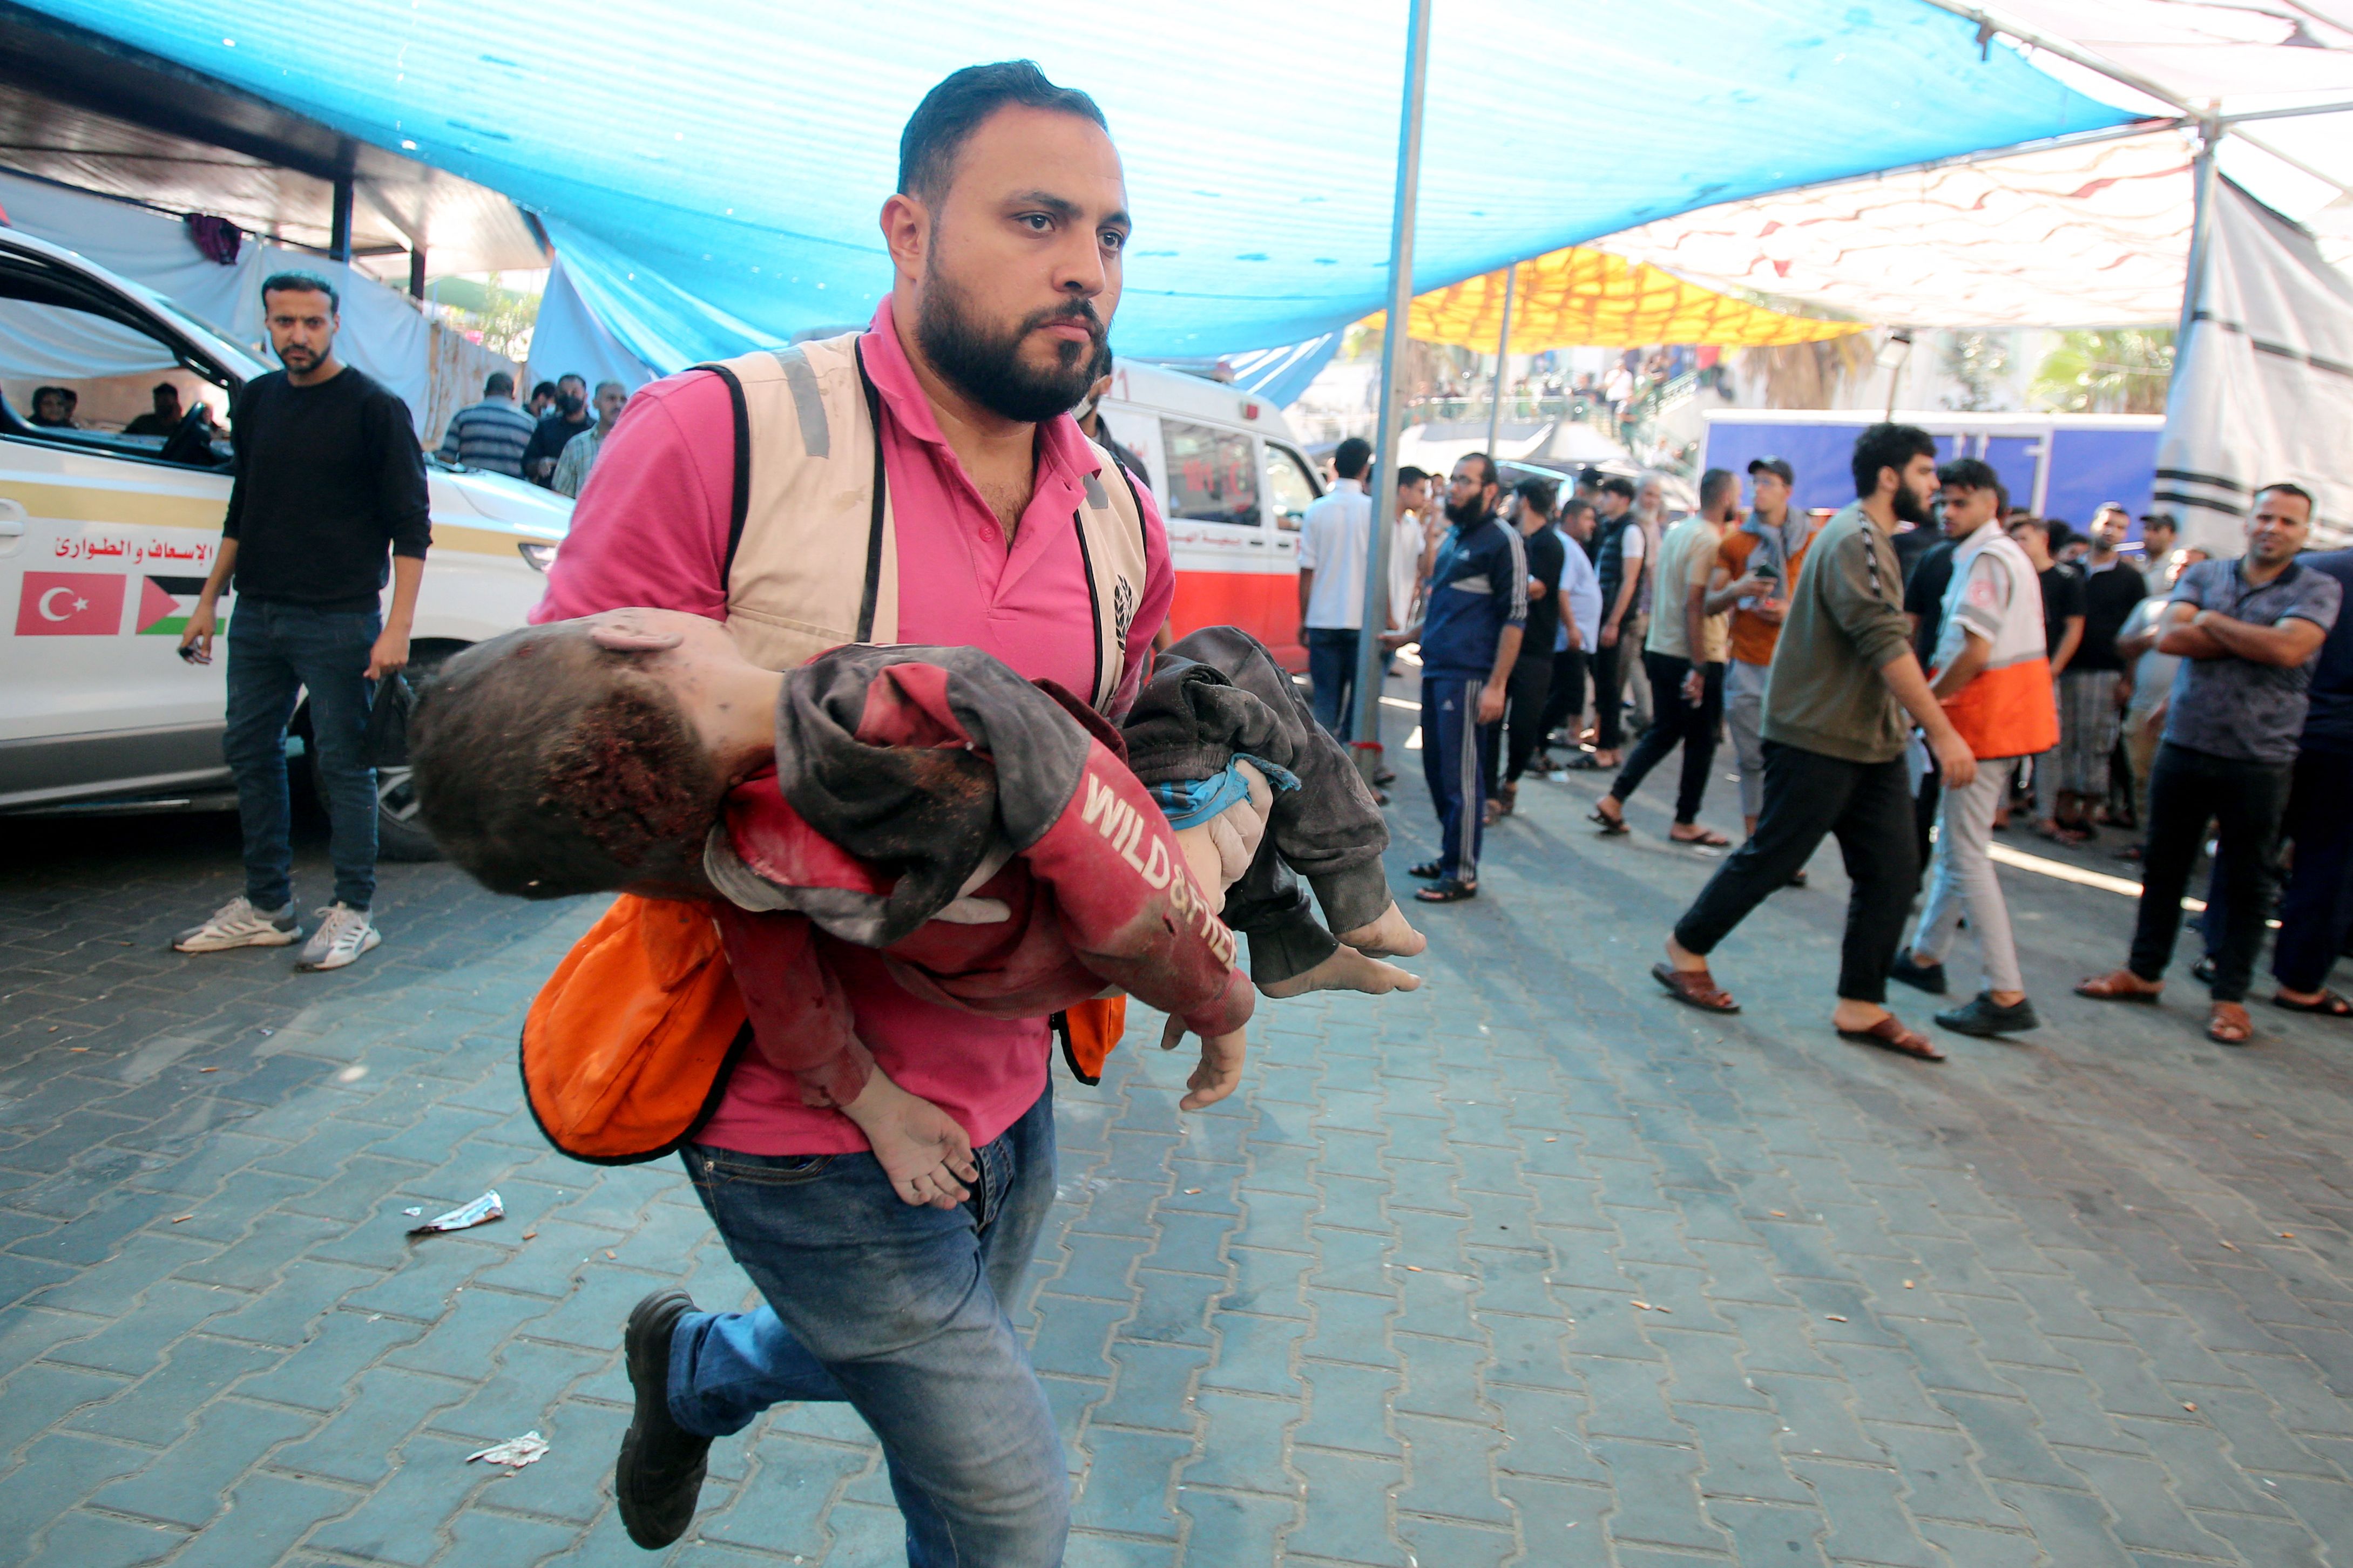 A man rushes with a toddler in his arms into Al-Shifa hospital in Gaza following Israeli bombing